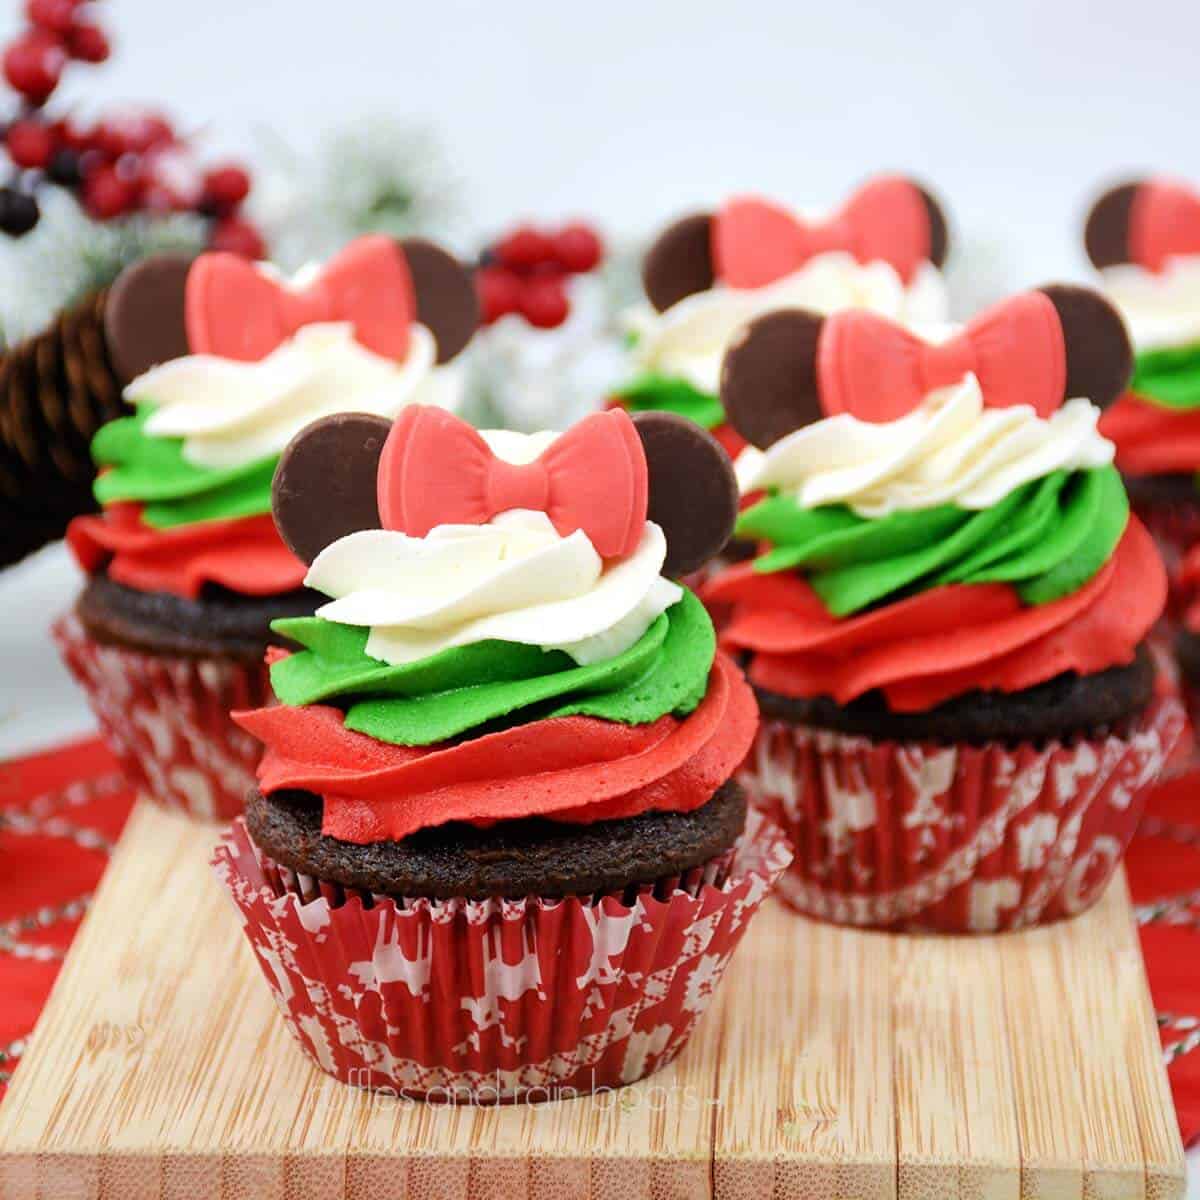 S close up image of 6 frosted Minnie Mouse Christmas cupcakes on a wooden slab on a red and white napkin on a white surface with Christmas greenery in the background.